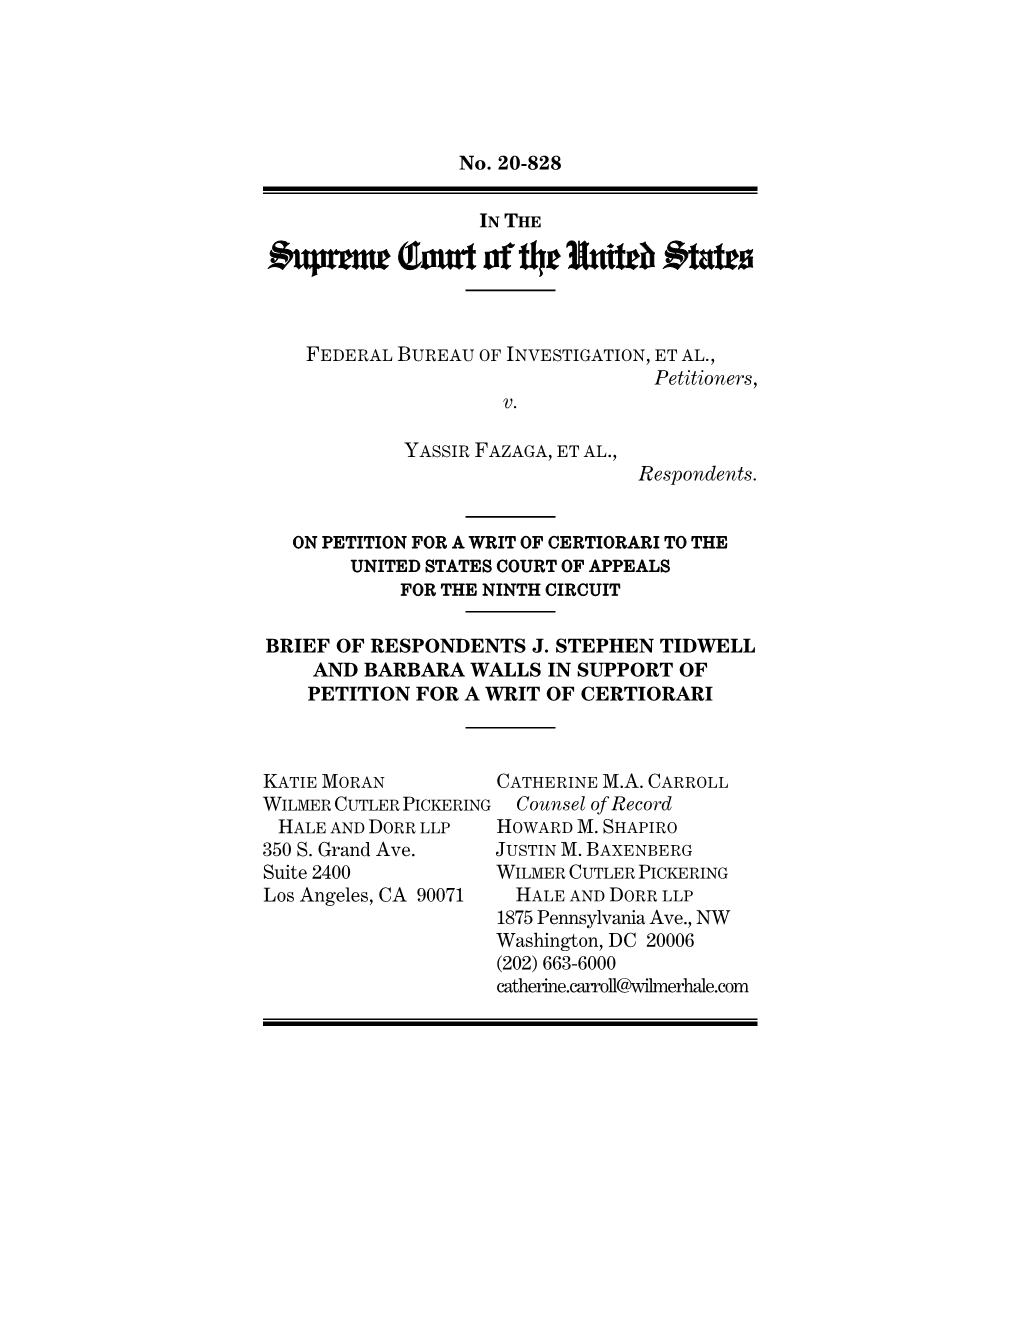 Brief of Respondents J. Stephen Tidwell and Barbara Walls in Support of Petition for a Writ of Certiorari